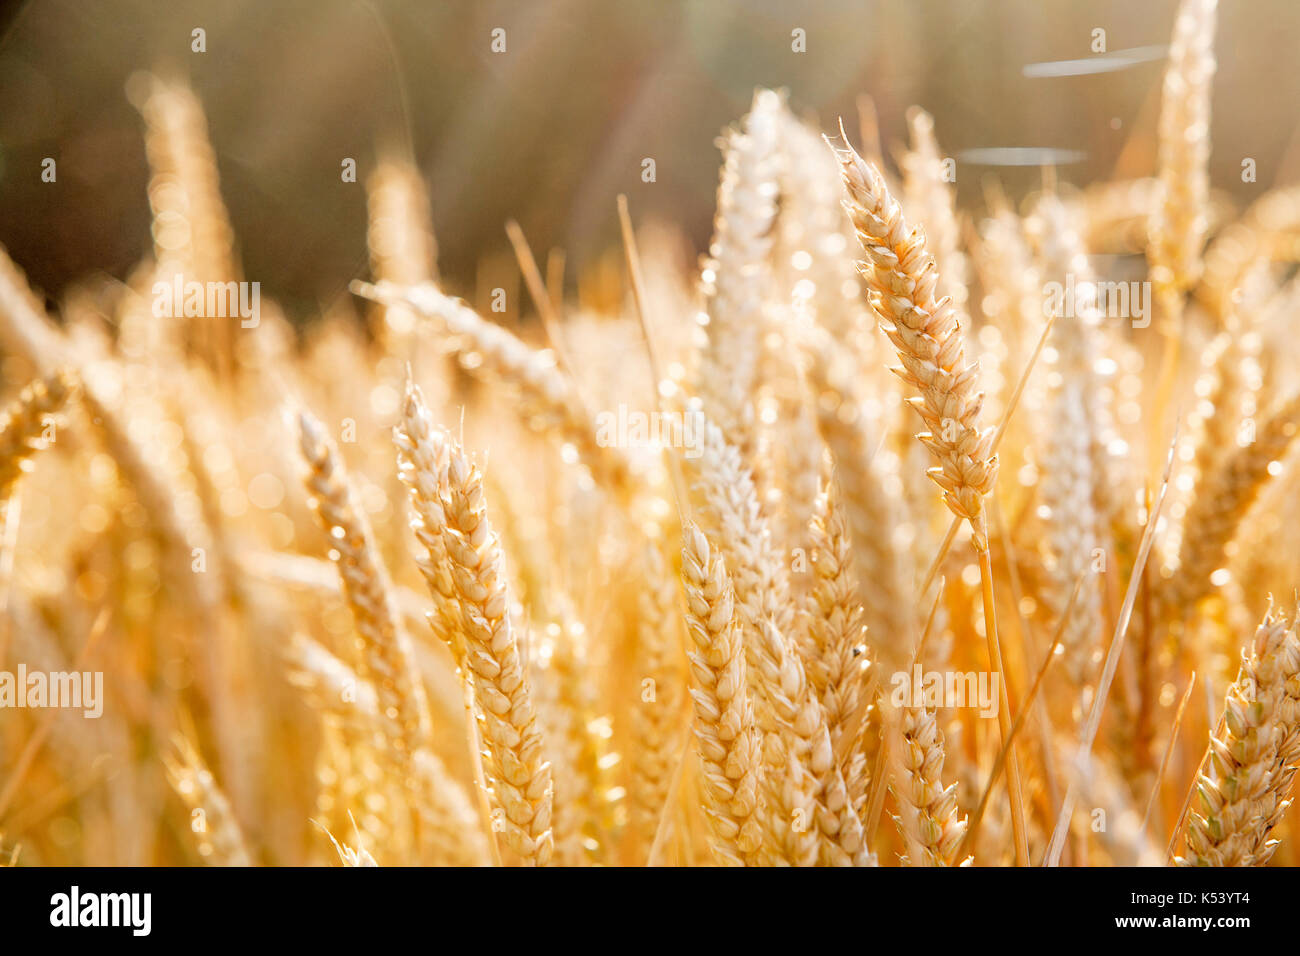 Gold colored cereal field Stock Photo